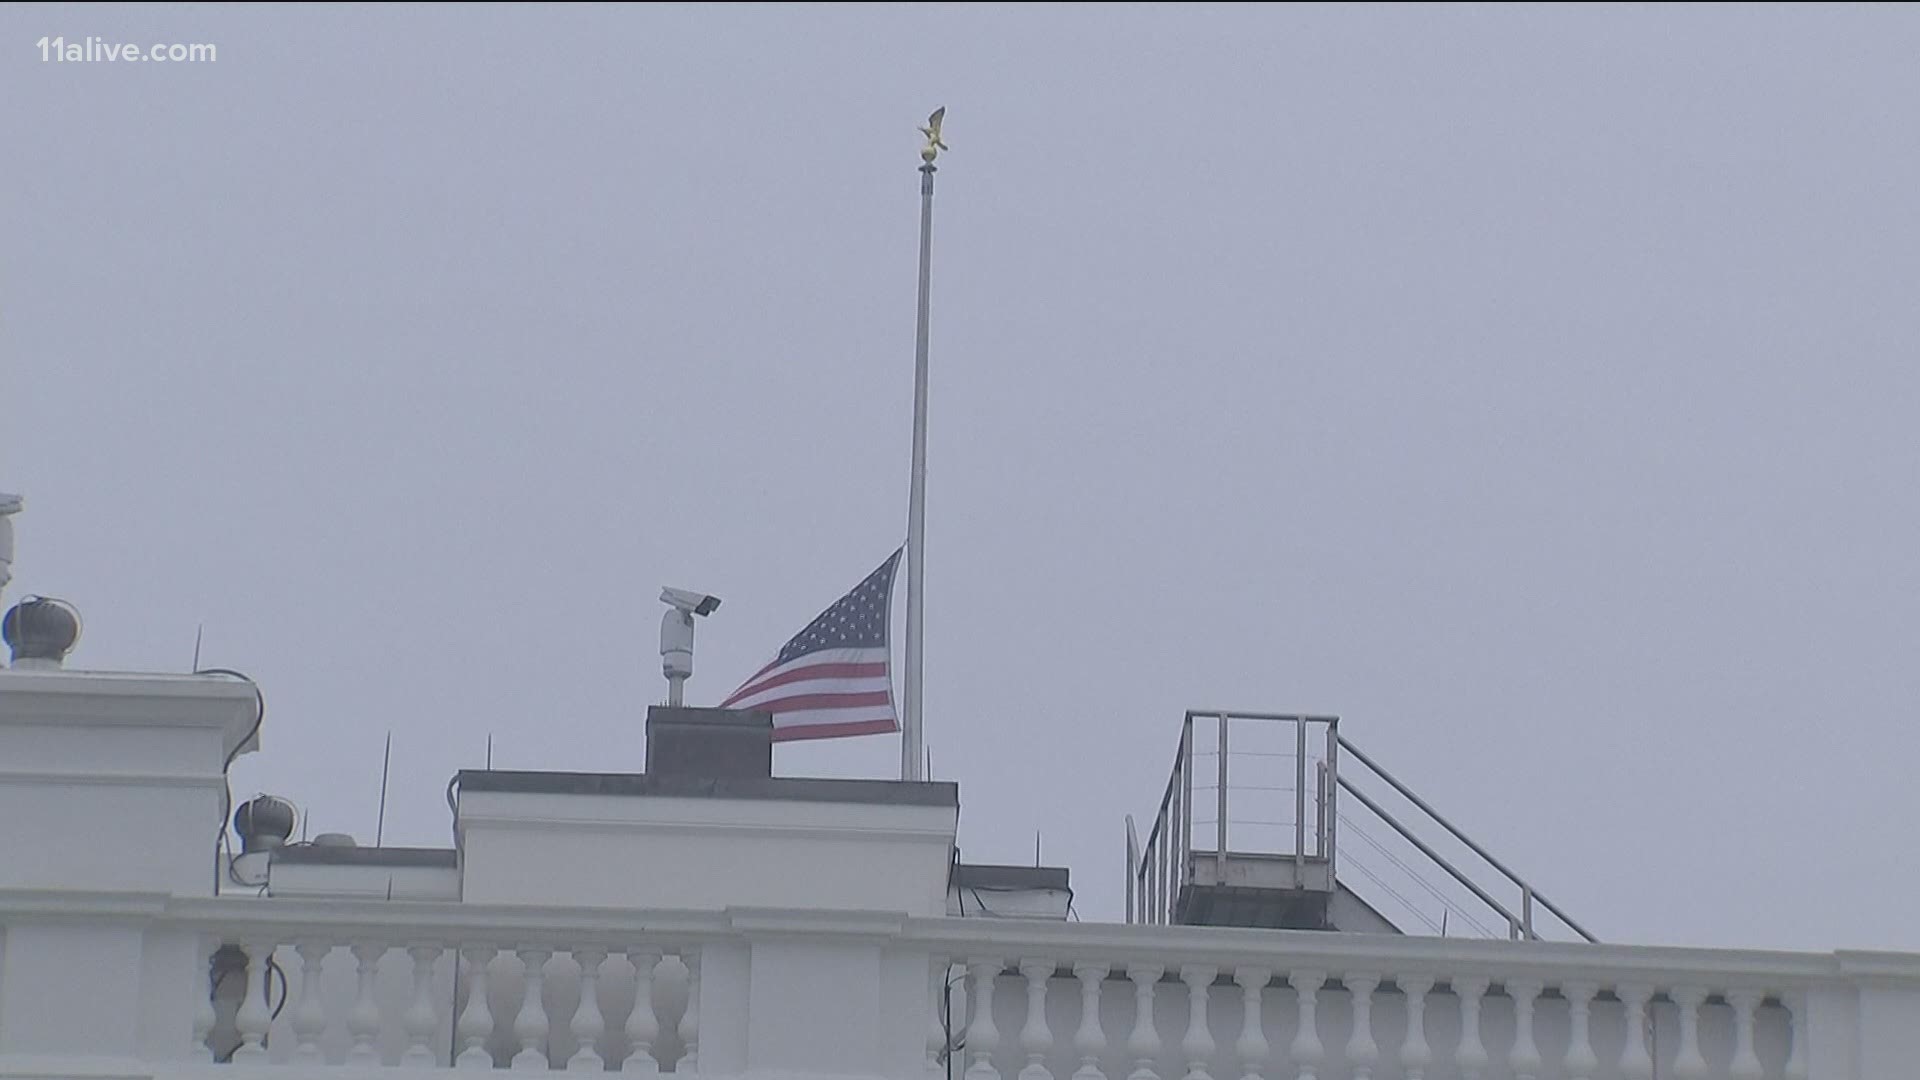 The president said in a proclamation that all U.S. flags across the country should remain at half-staff until sunset on March 22, 2021.